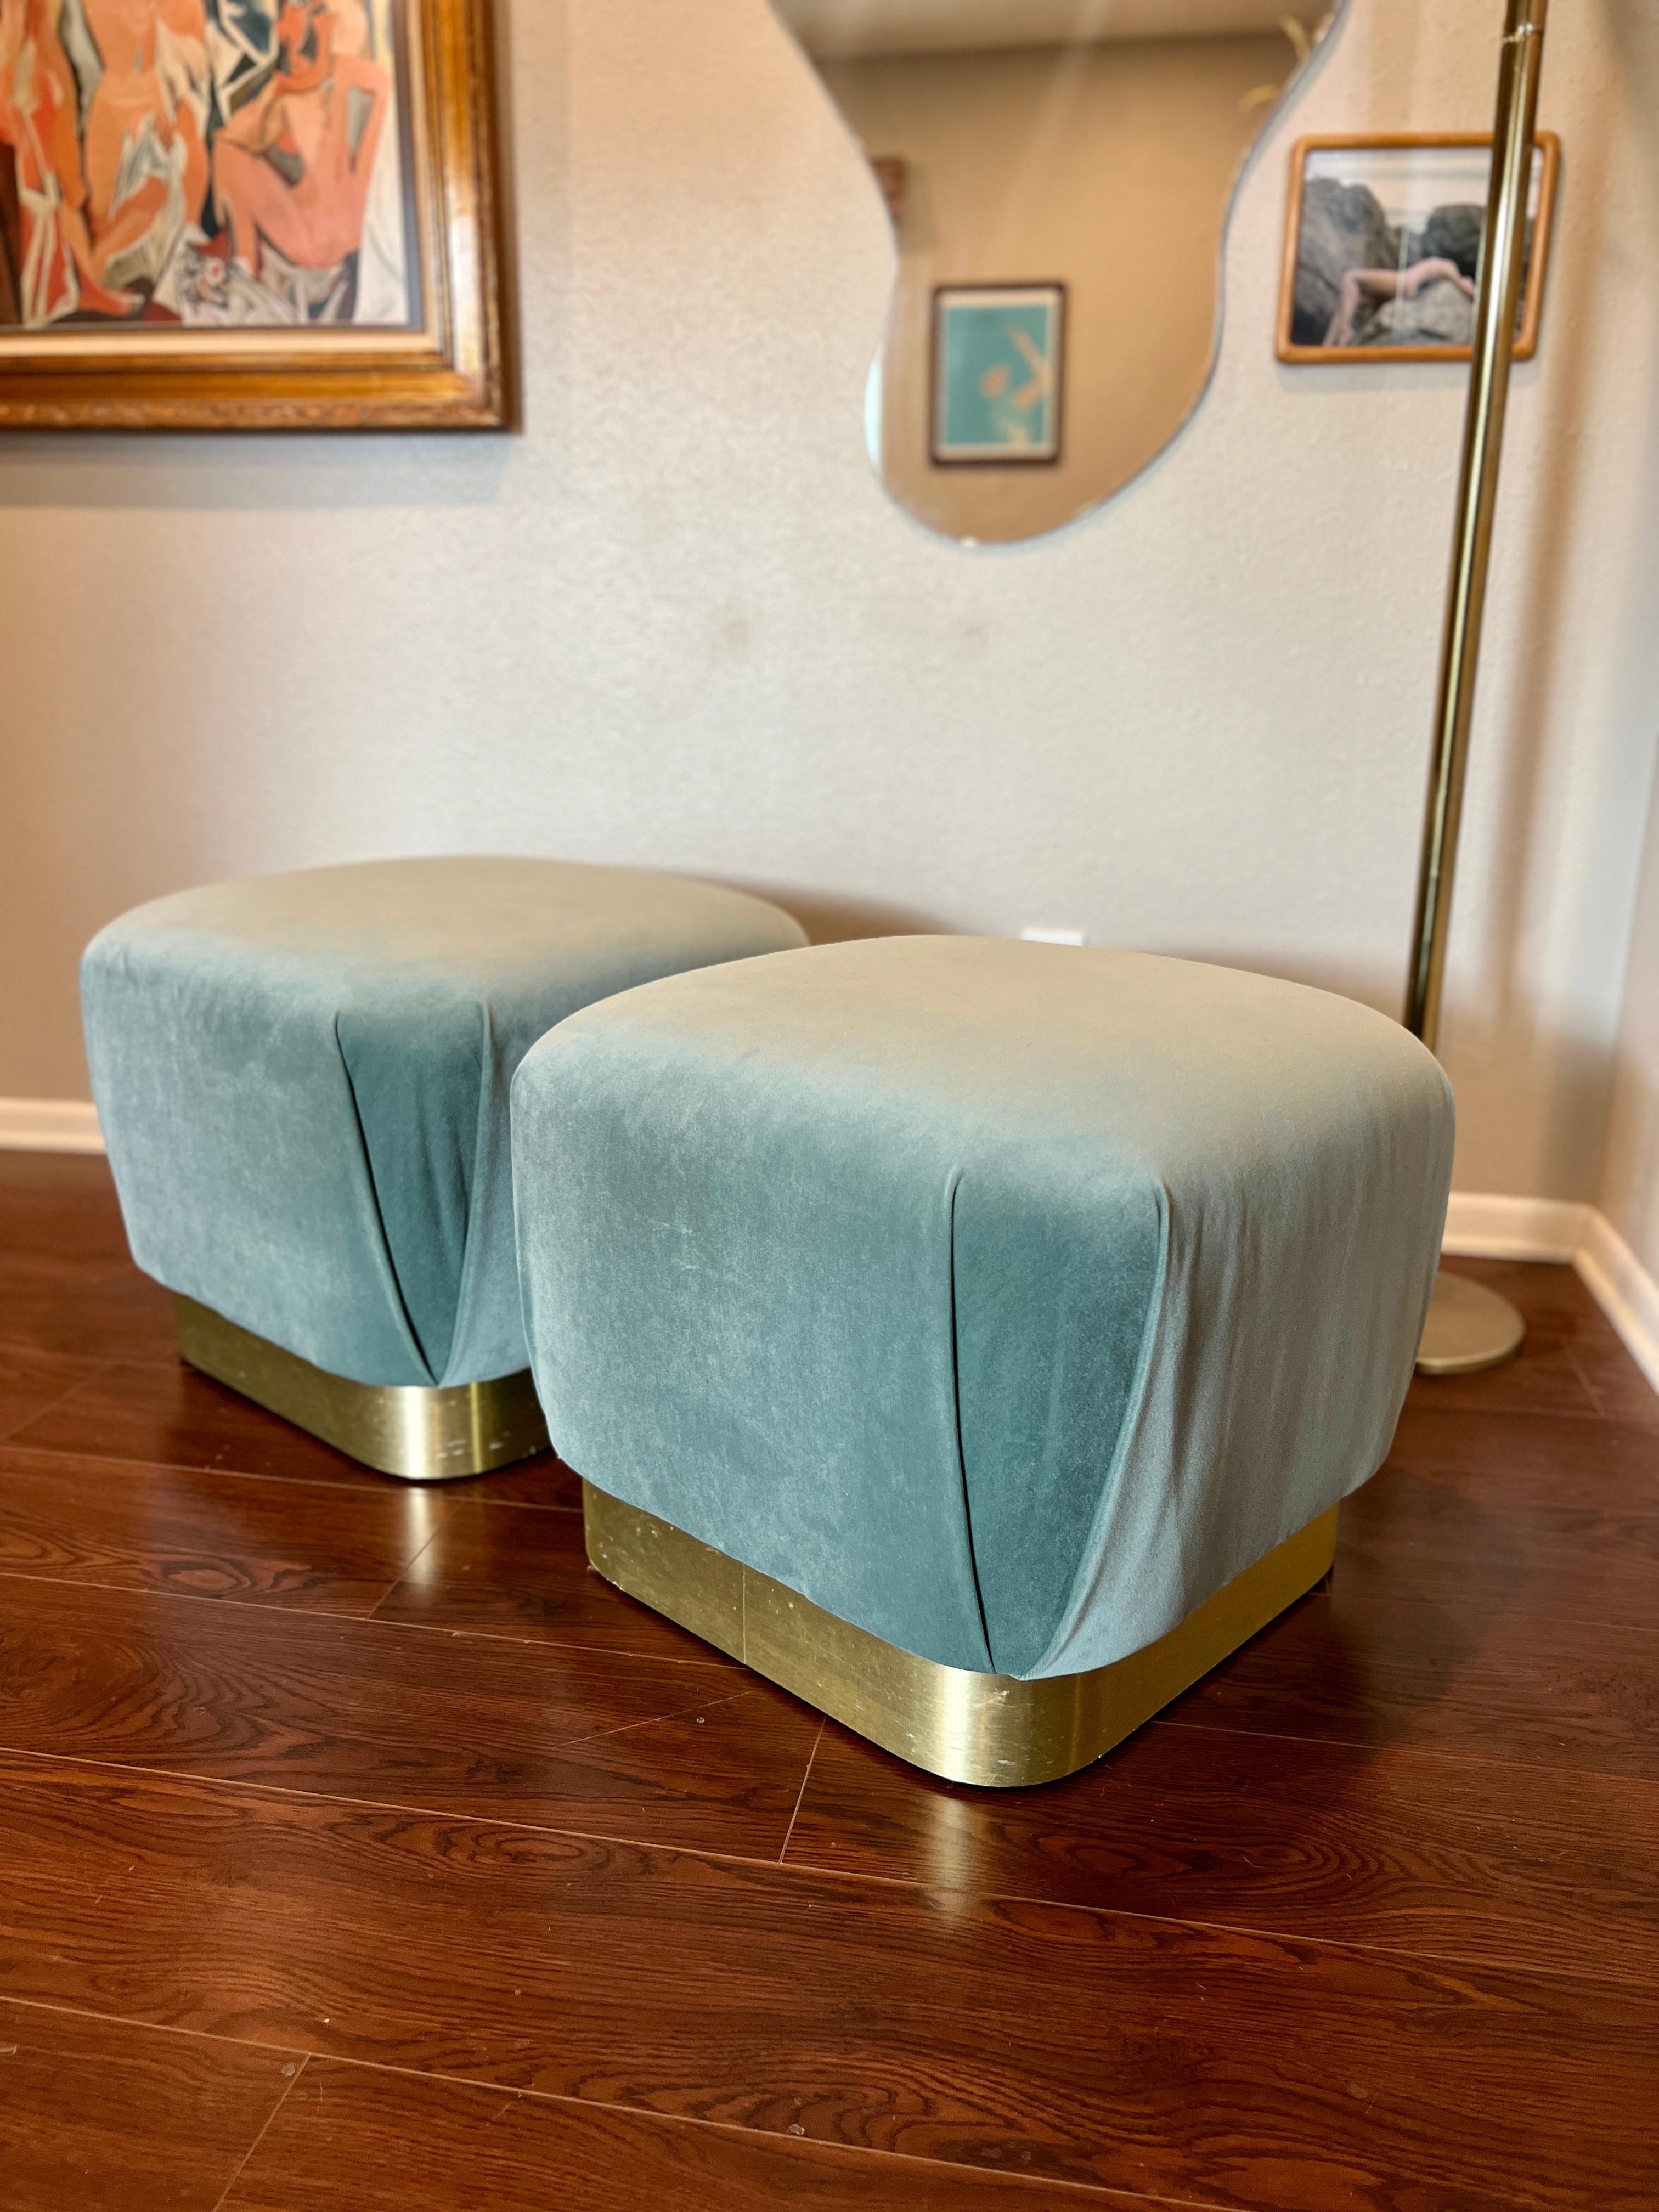 1980s Marge Carson style soufflé pouffs recovered in a pool blue velvet For Sale 6